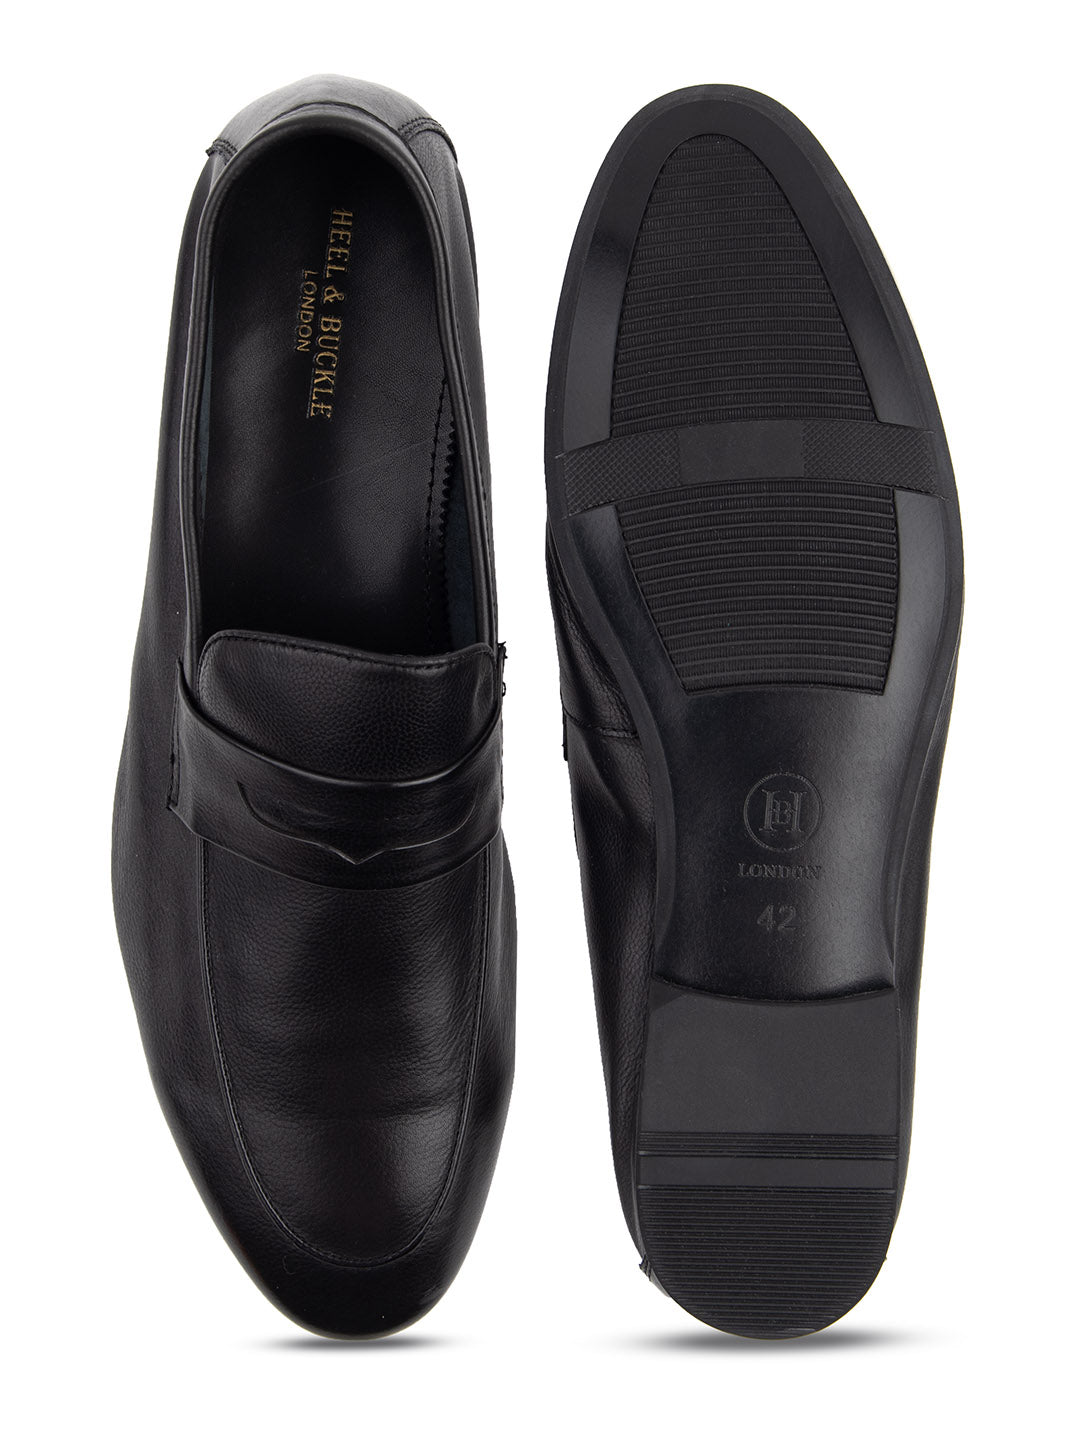 Diverse Black Penny Loafers